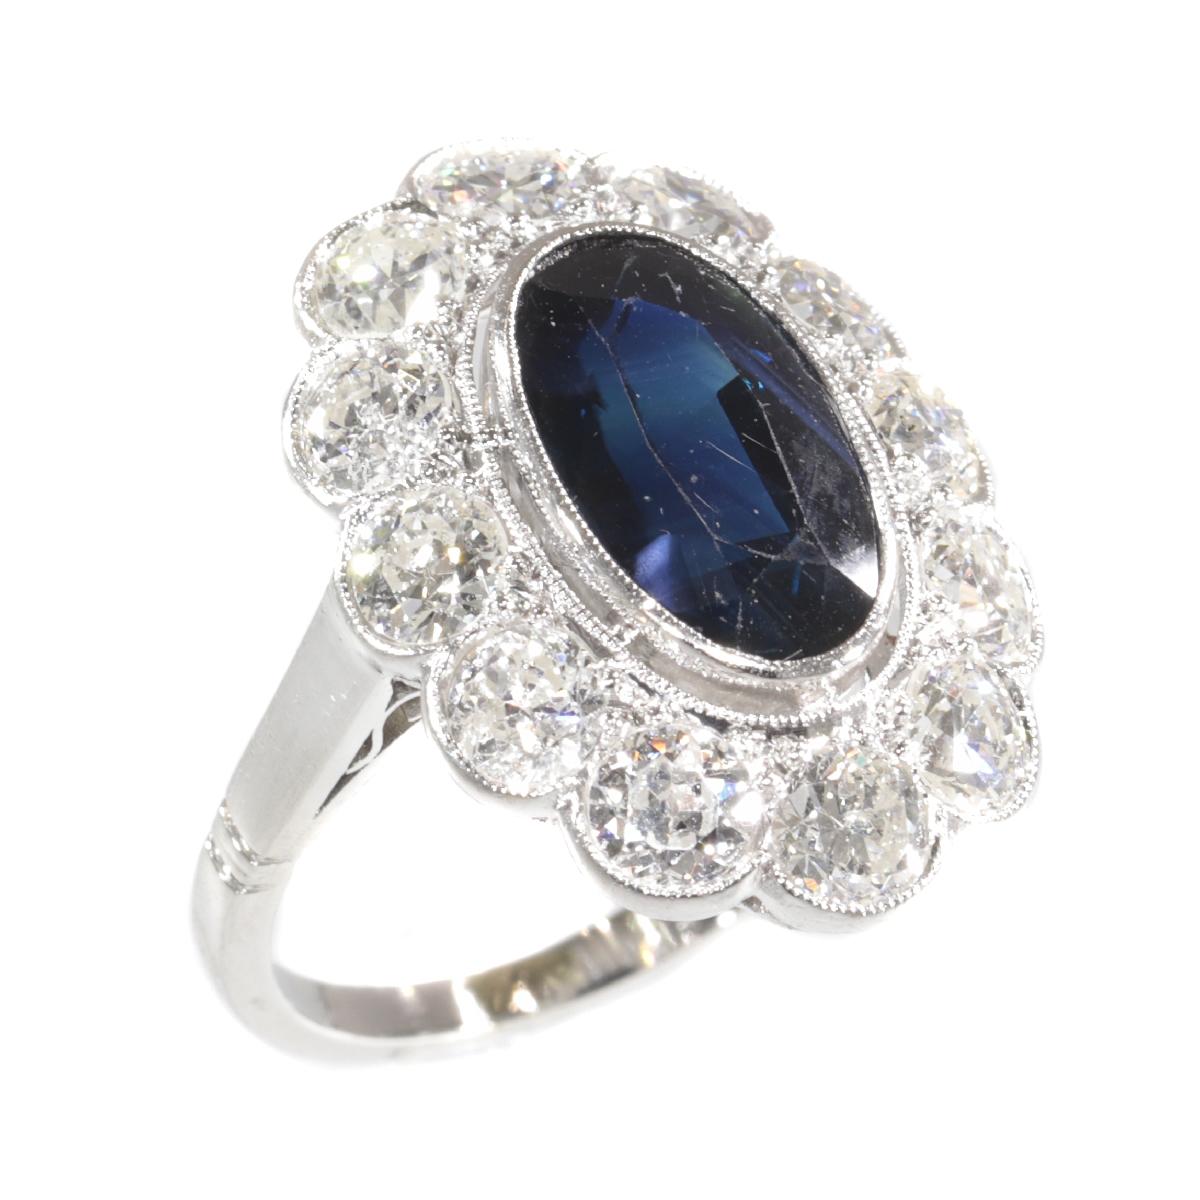 Vintage 1950s Platinum Diamond and Sapphire Engagement Ring, Lady Di Style For Sale 3